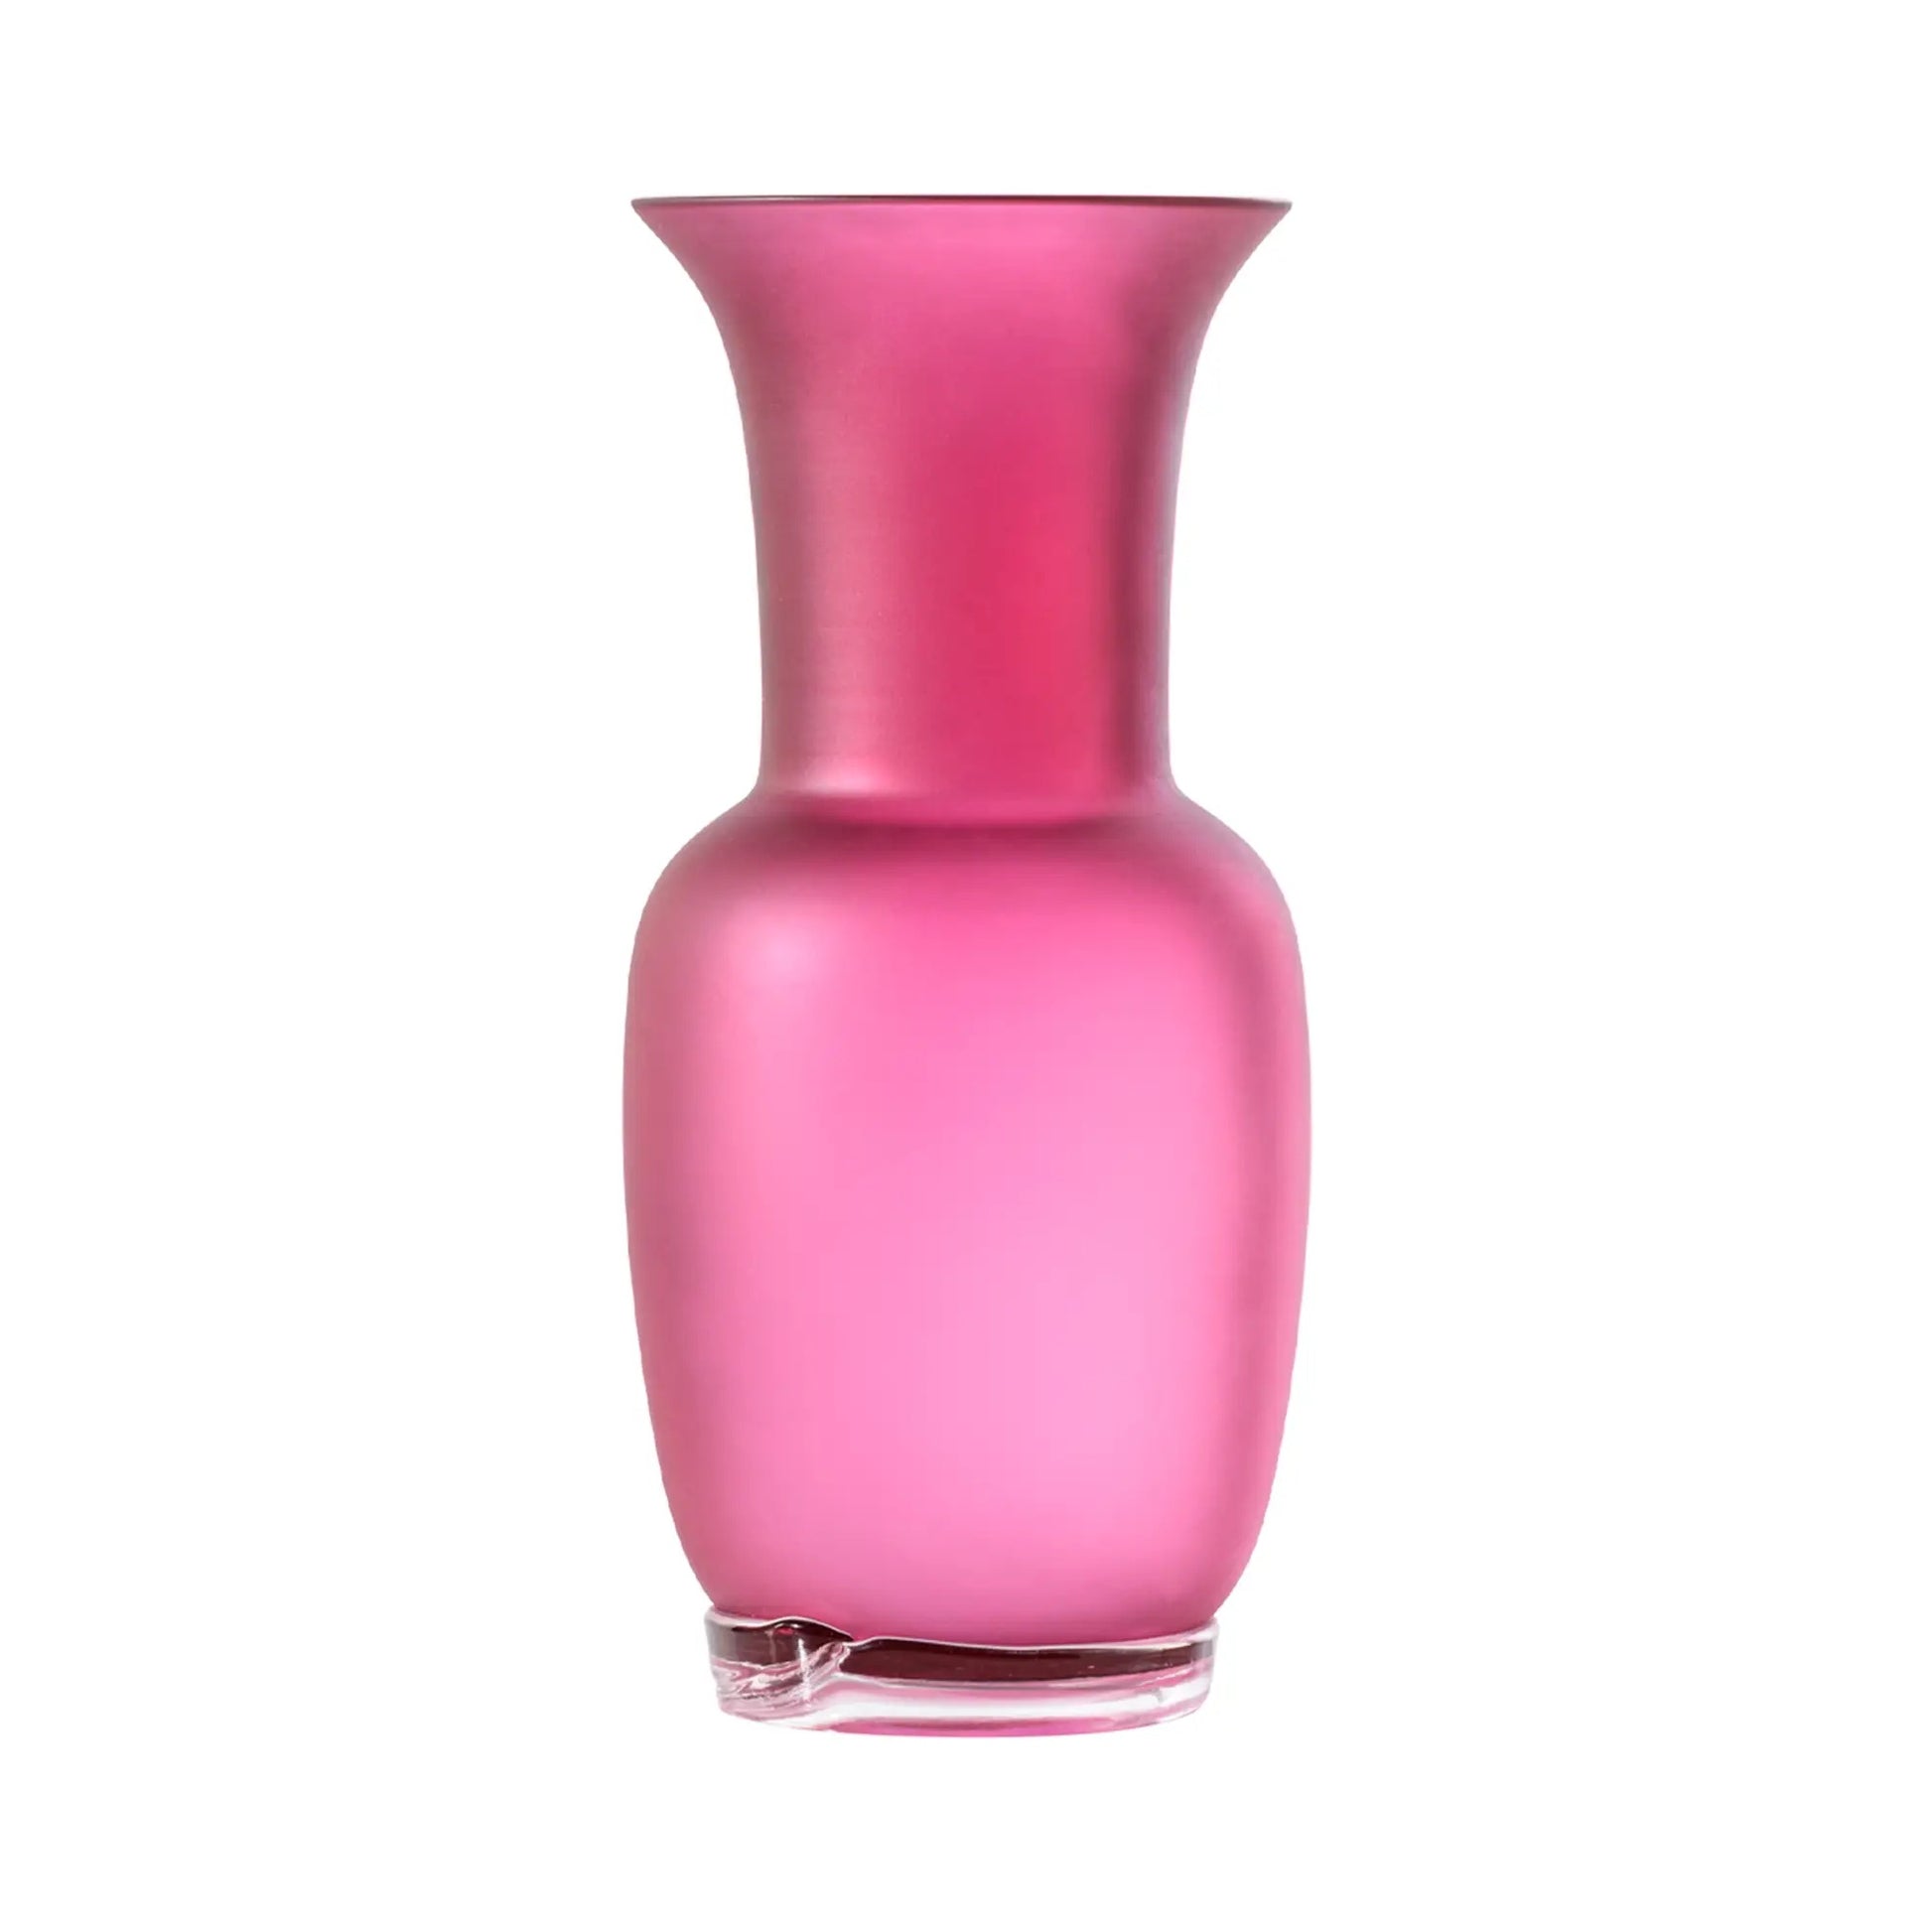 Opalino Murano Glass Vase by Venini | Handmade blown glass vase known for its purity, essential lines, and sophisticated colors | Available in matte or glossy, opale or transparent finishes | Exhibited worldwide for over ninety years | Home Decor Vases | 2Jour Concierge, your luxury lifestyle shop